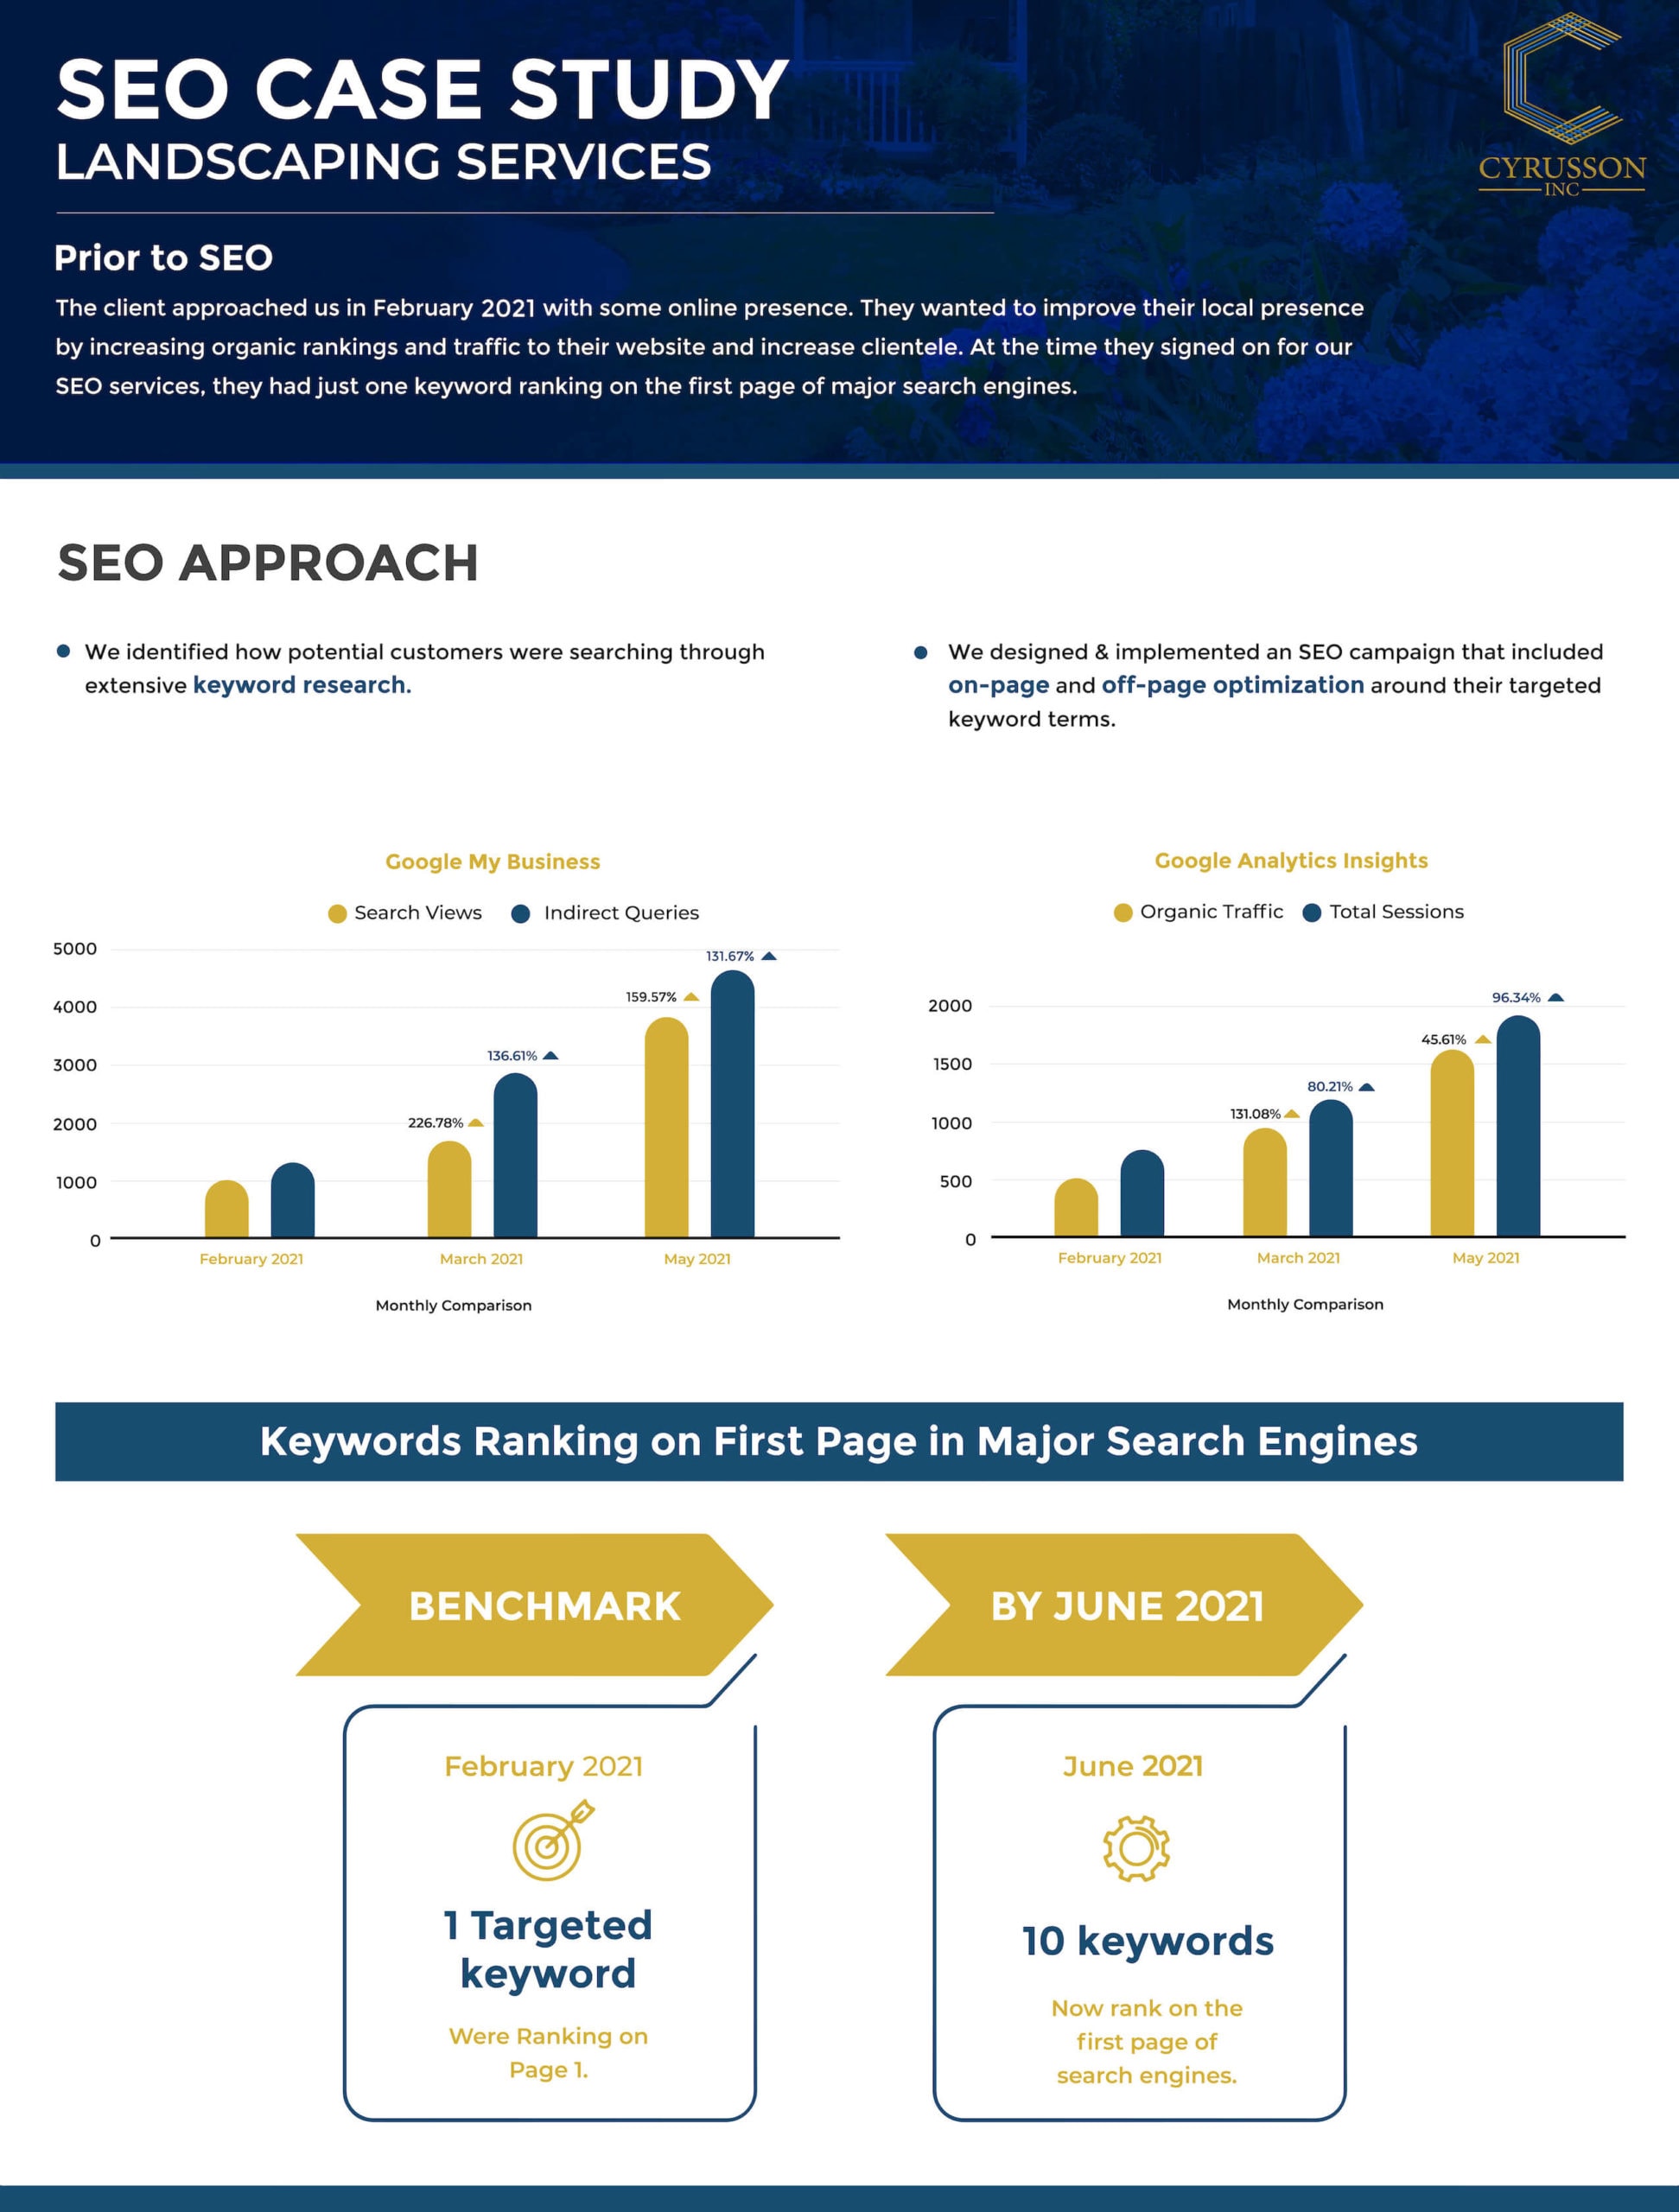 SEO Case Study - Landscaping Services | Cyrusson